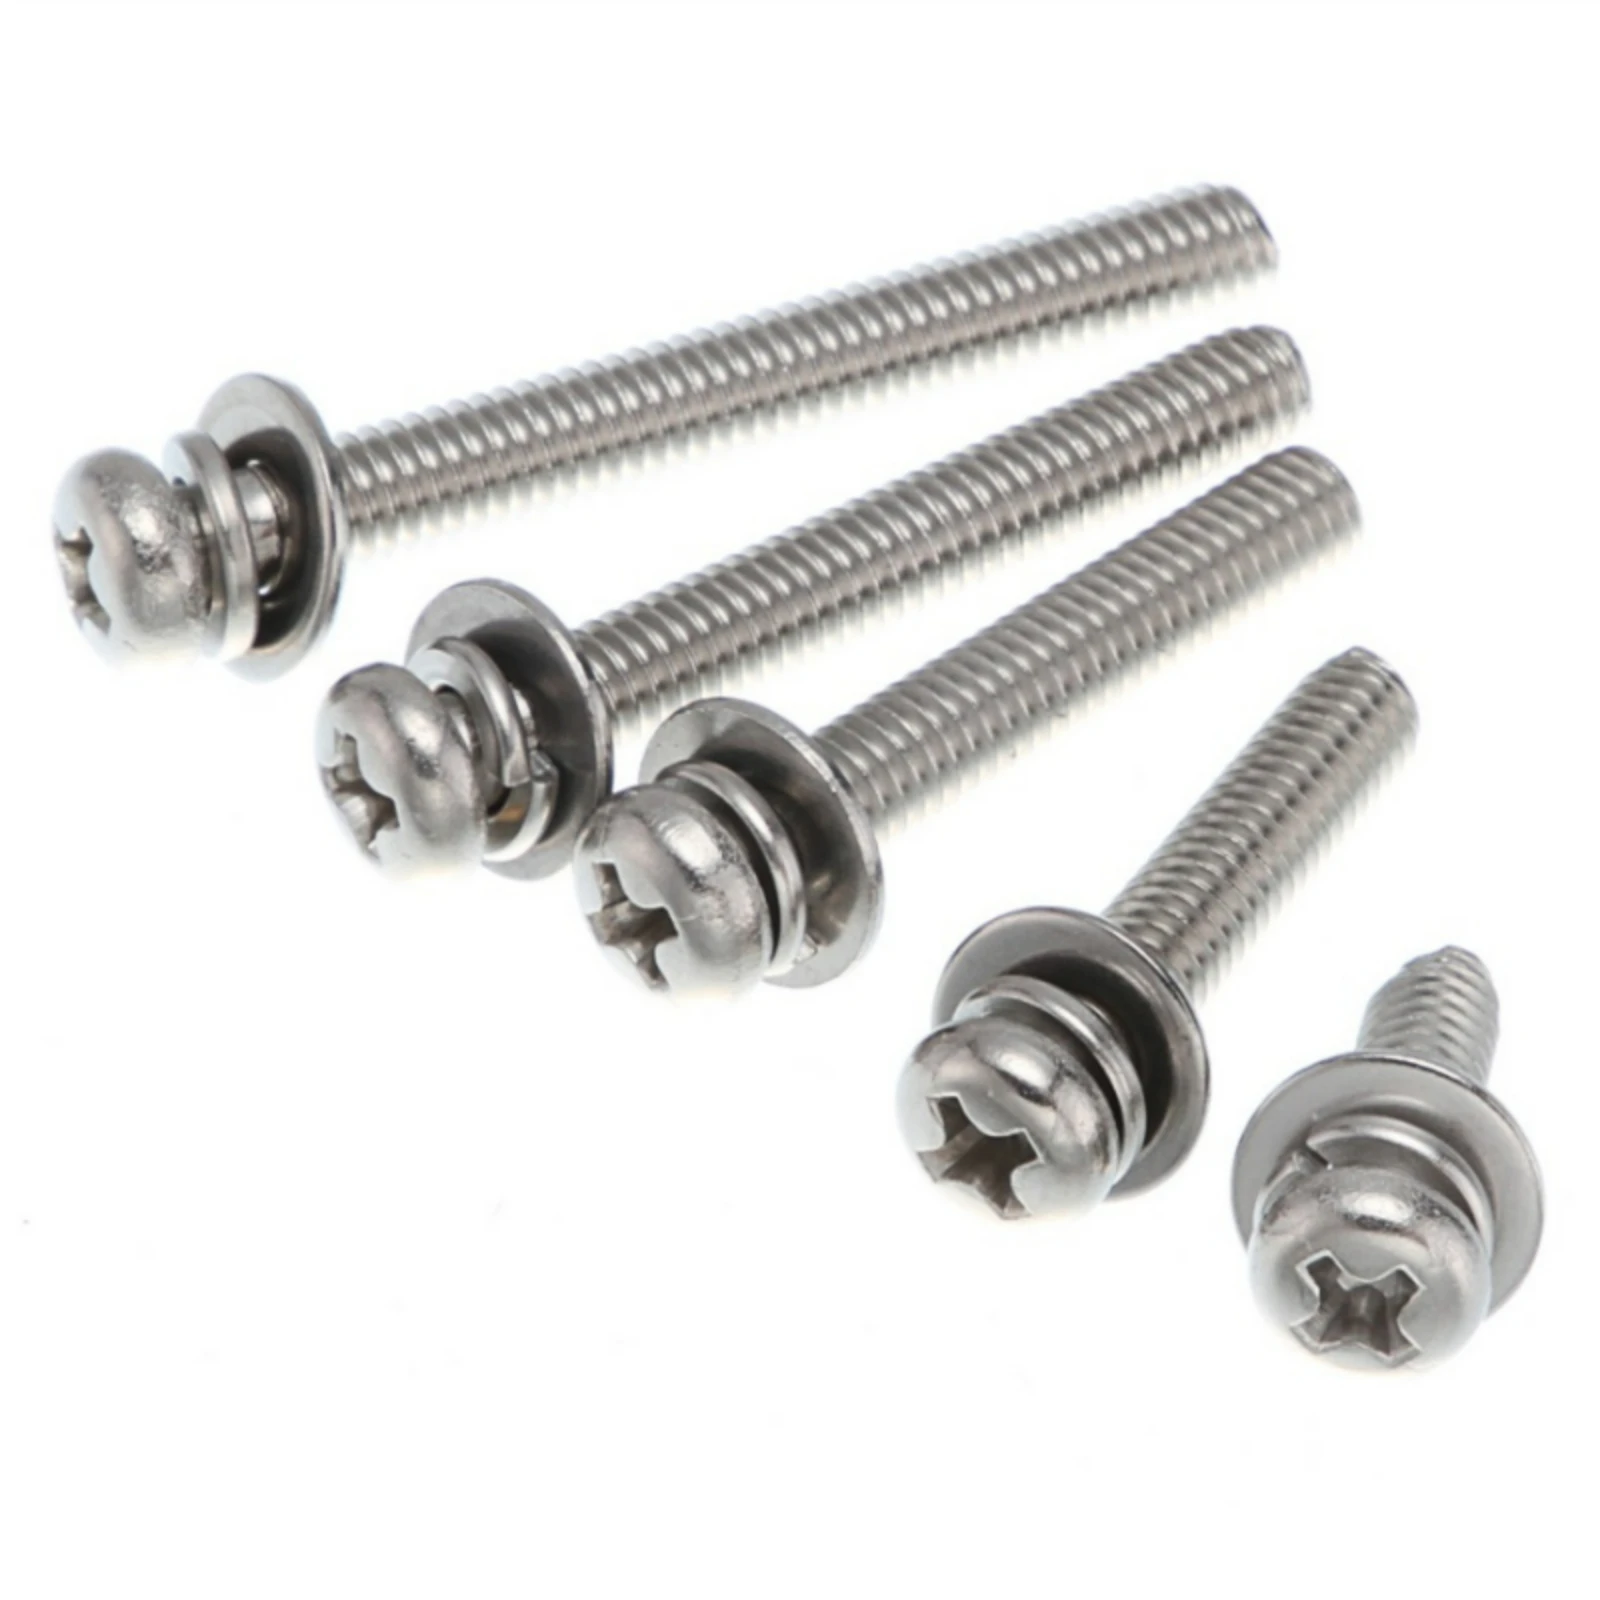 

M3- M6 Phillips Pan Head Three Combination Screw 316 Stainless Steel Cross Round Head With Washer Sems Screws Bolts Kit Set